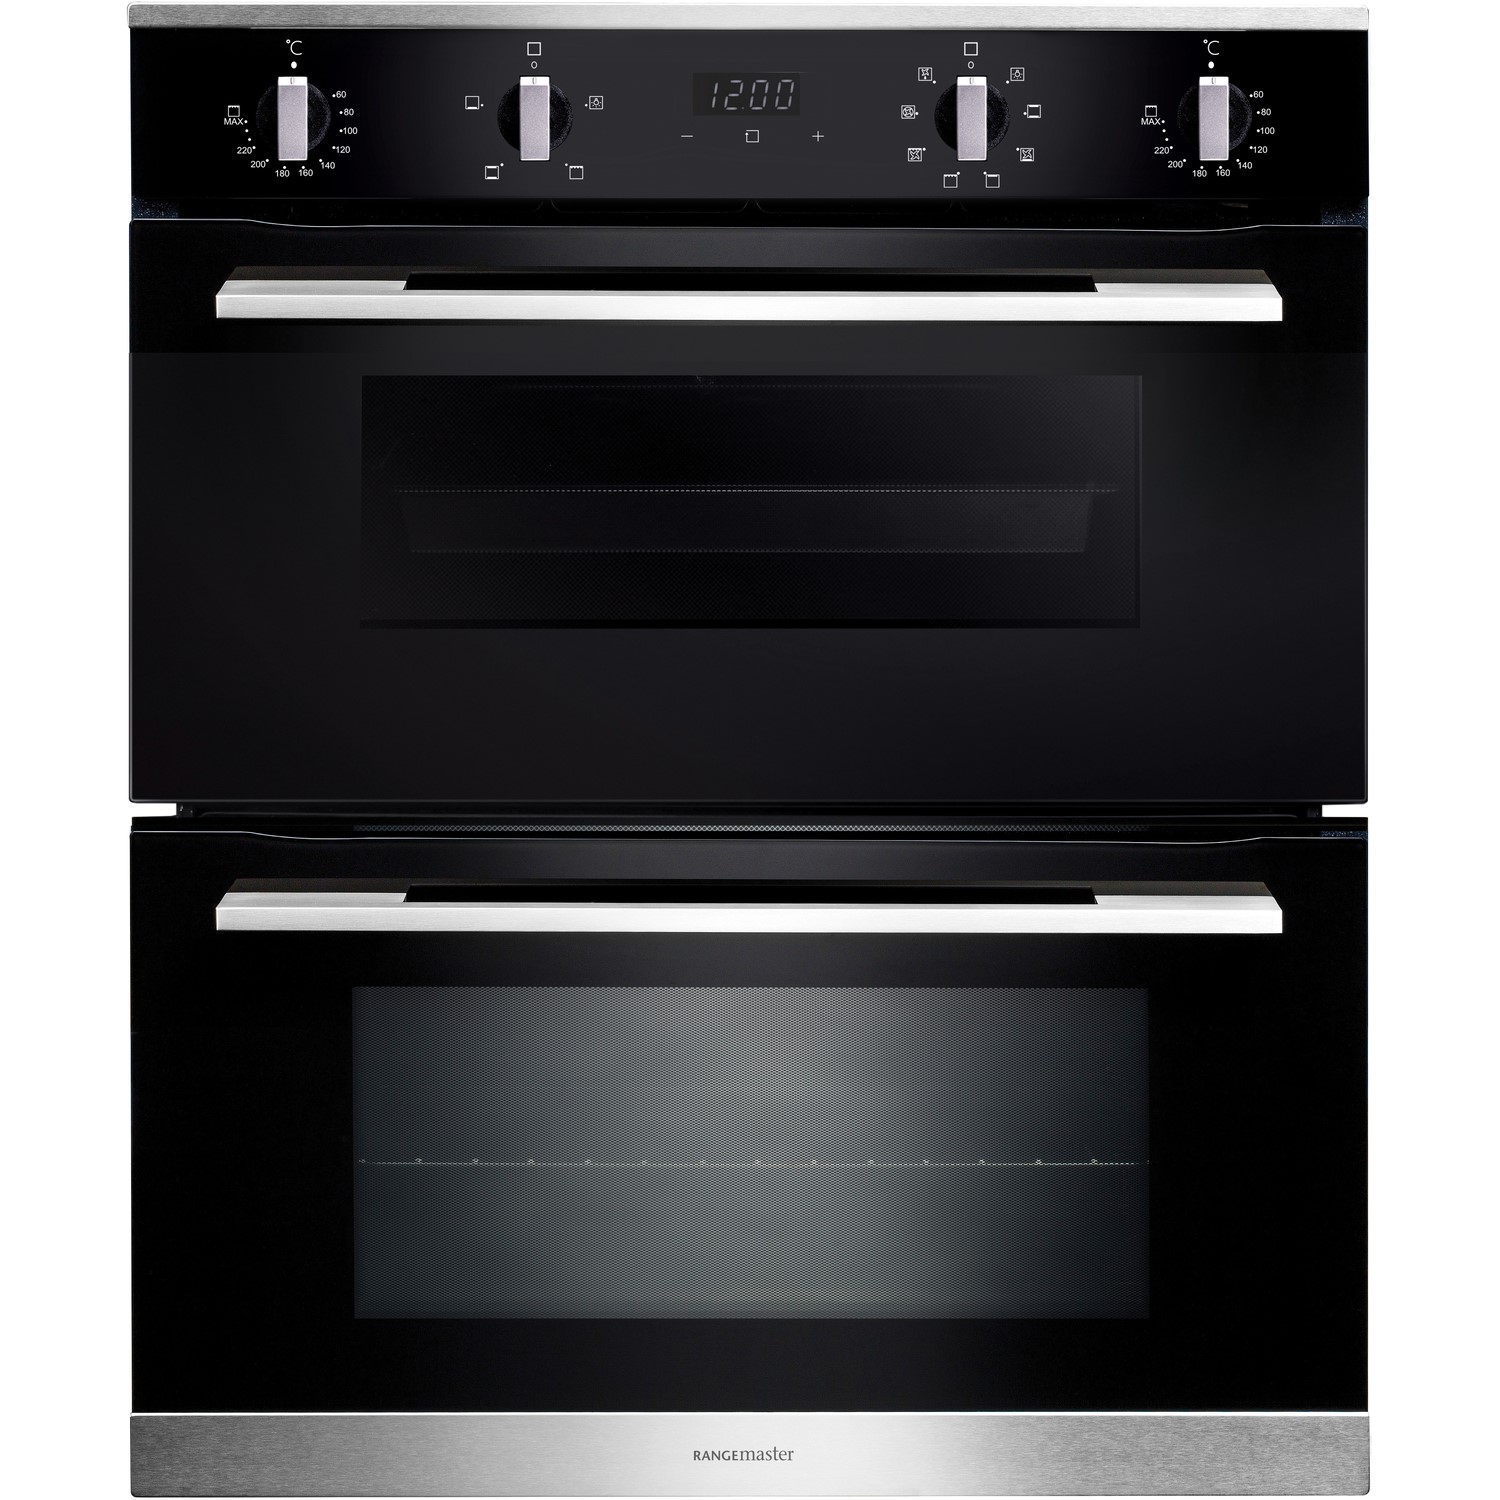 Refurbished Rangemaster RMB7248BLSS 60cm Double Built Under Electric Oven Stainless Steel